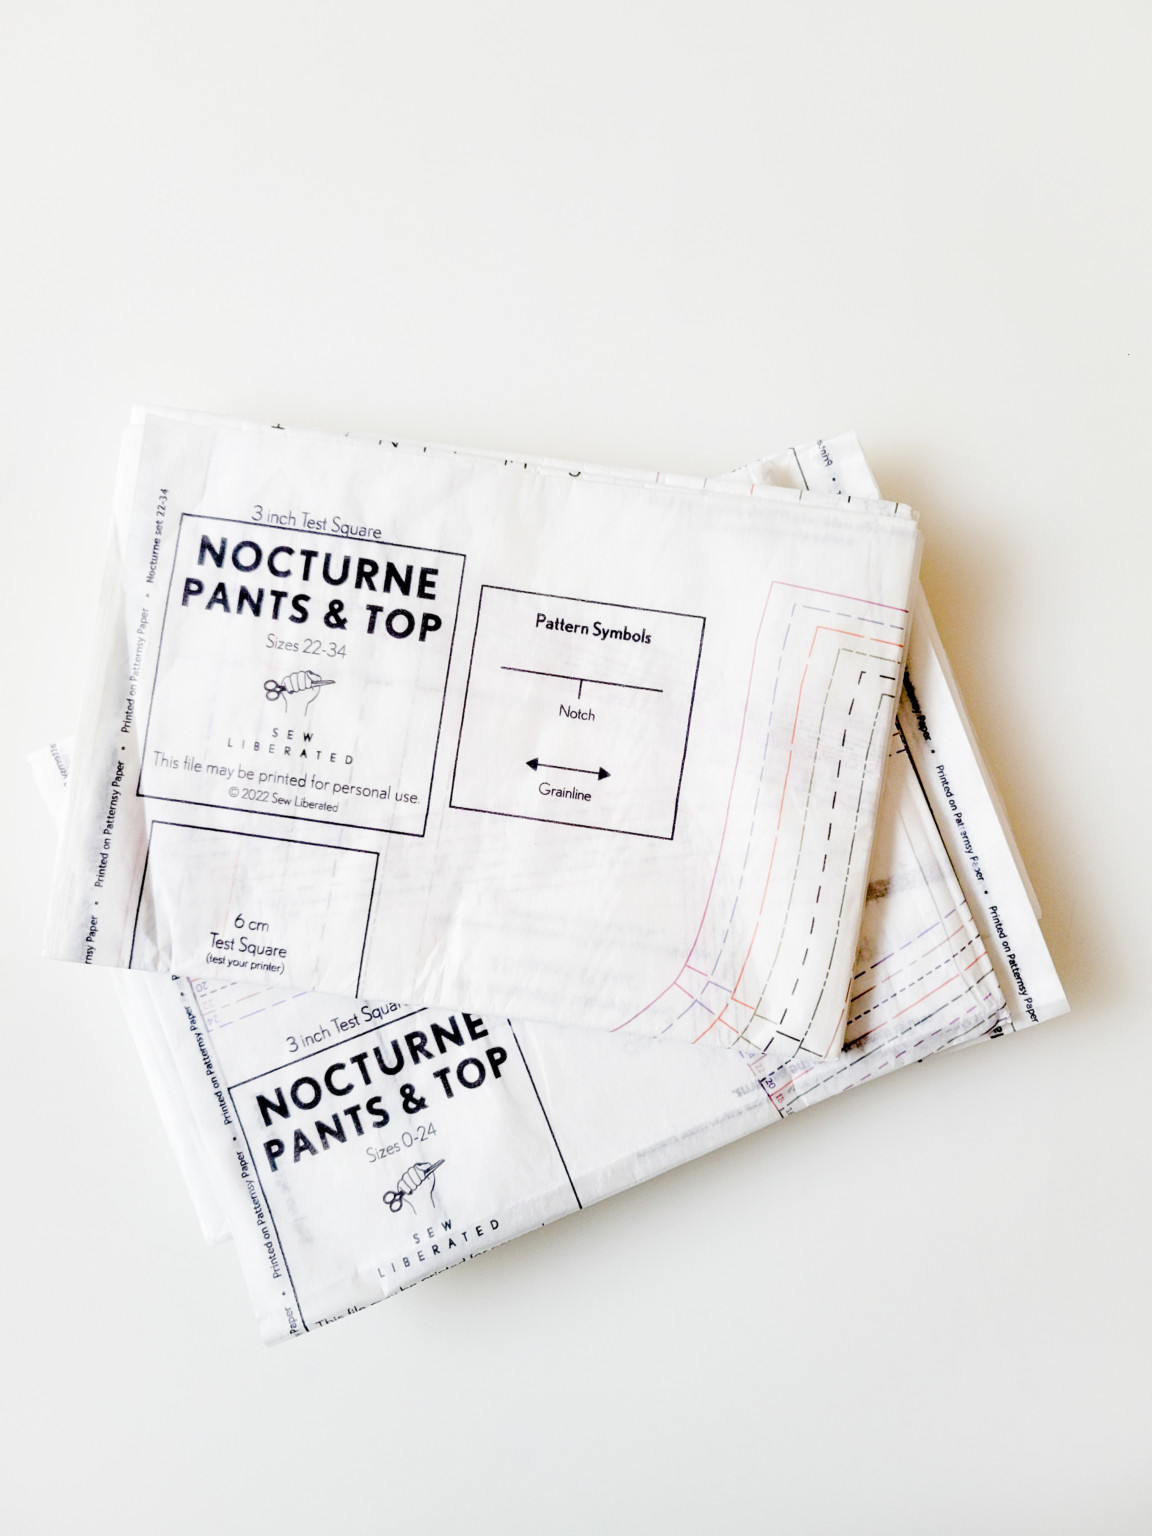 Printed pattern sheets of the Nocturne Pajamas Pattern are sitting on a white table.